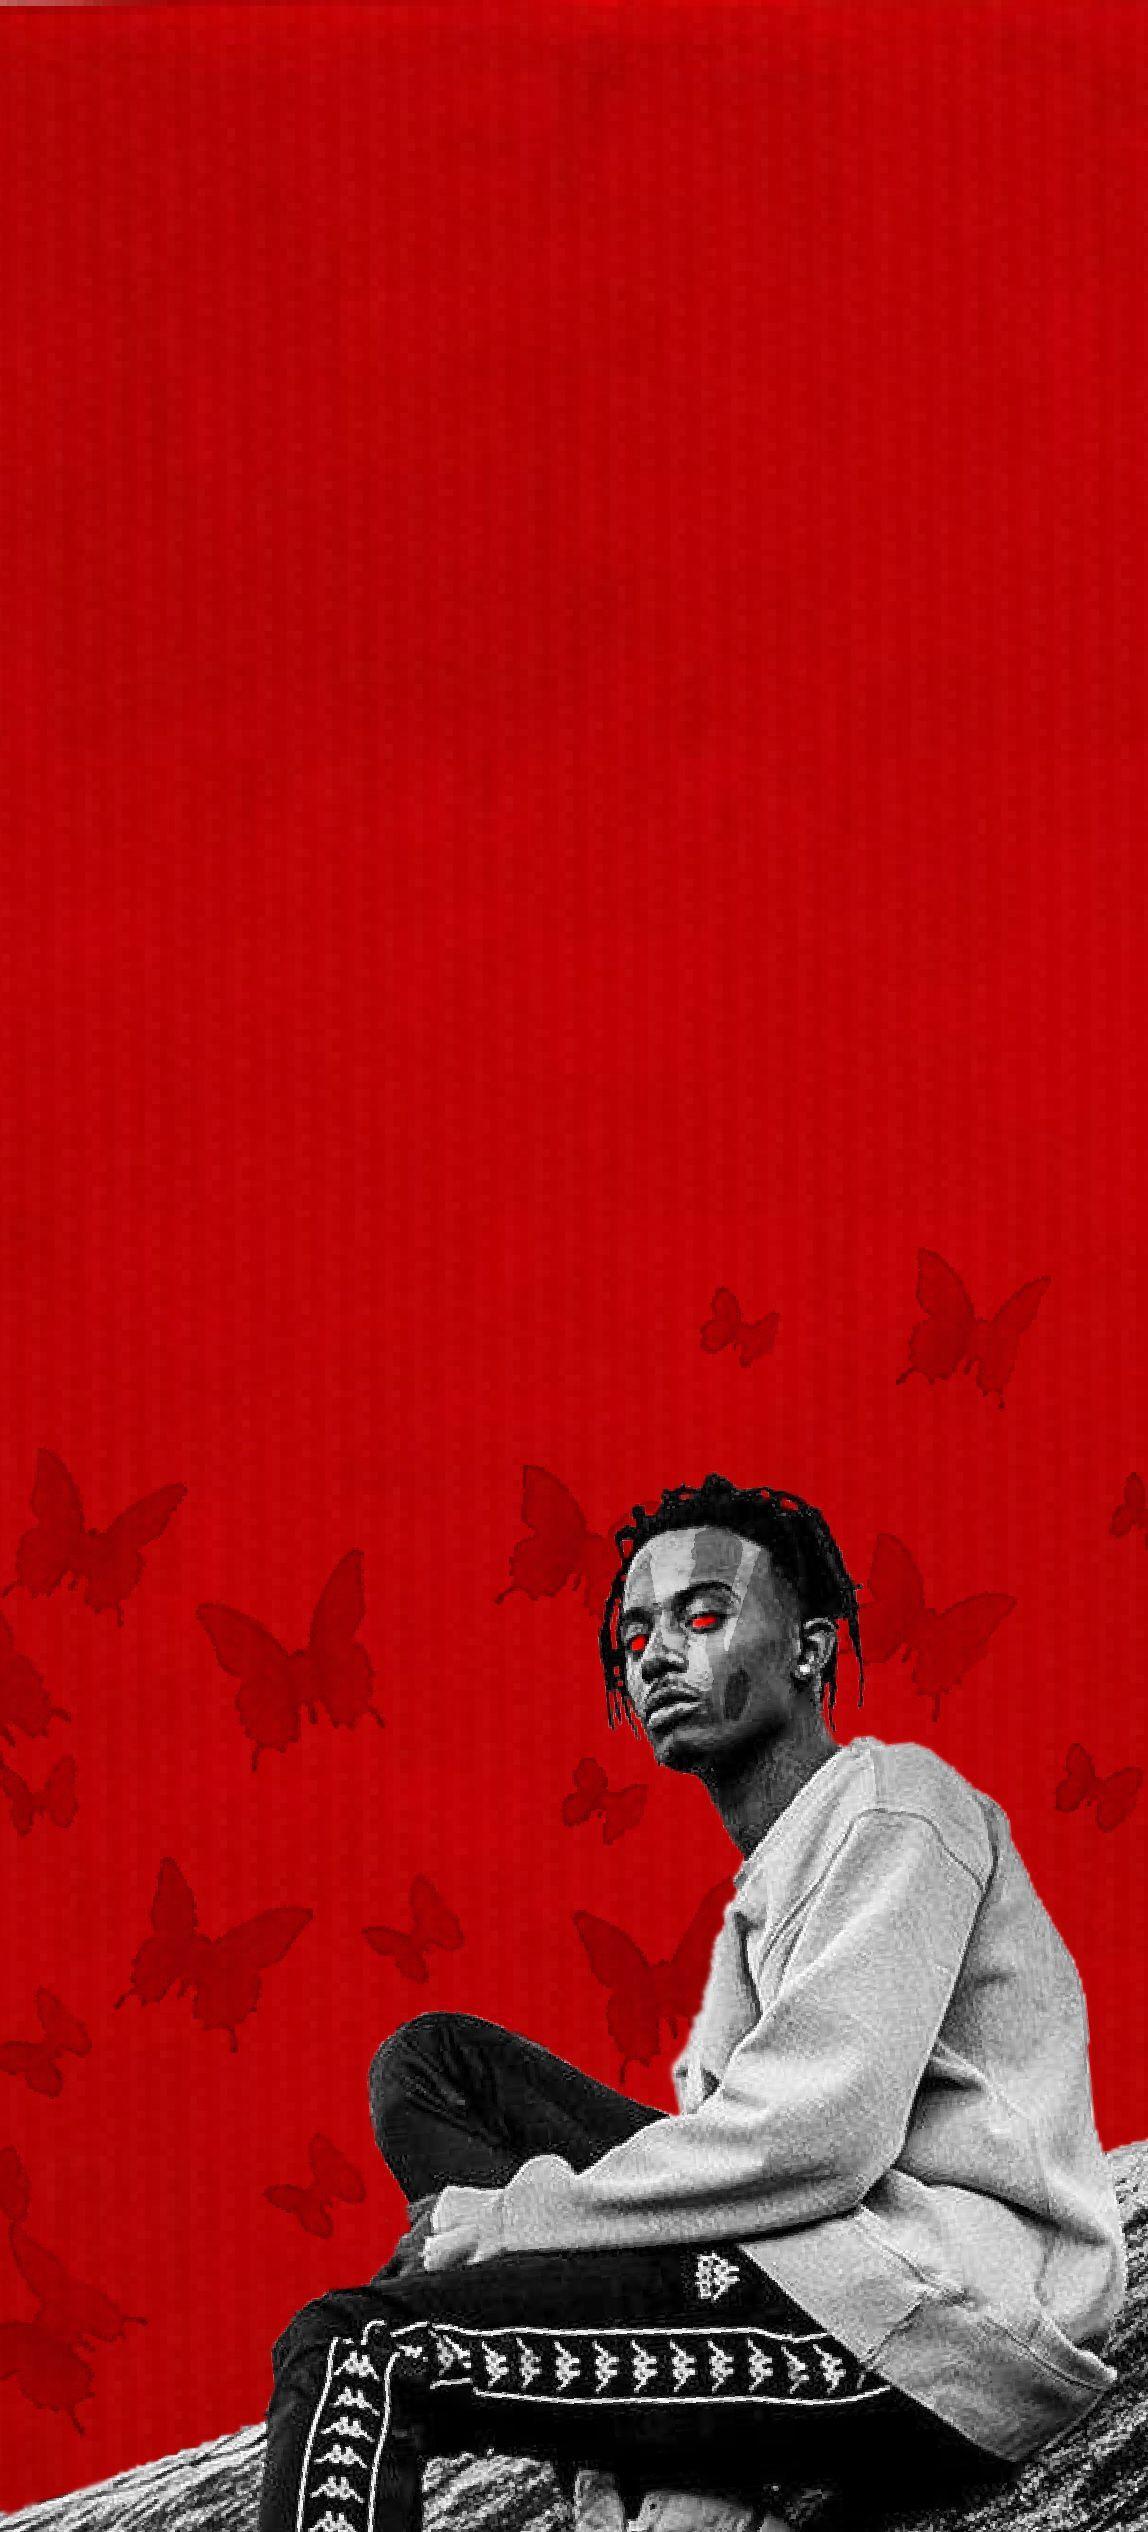 Carti wallpaper I made❤️ luv y'all